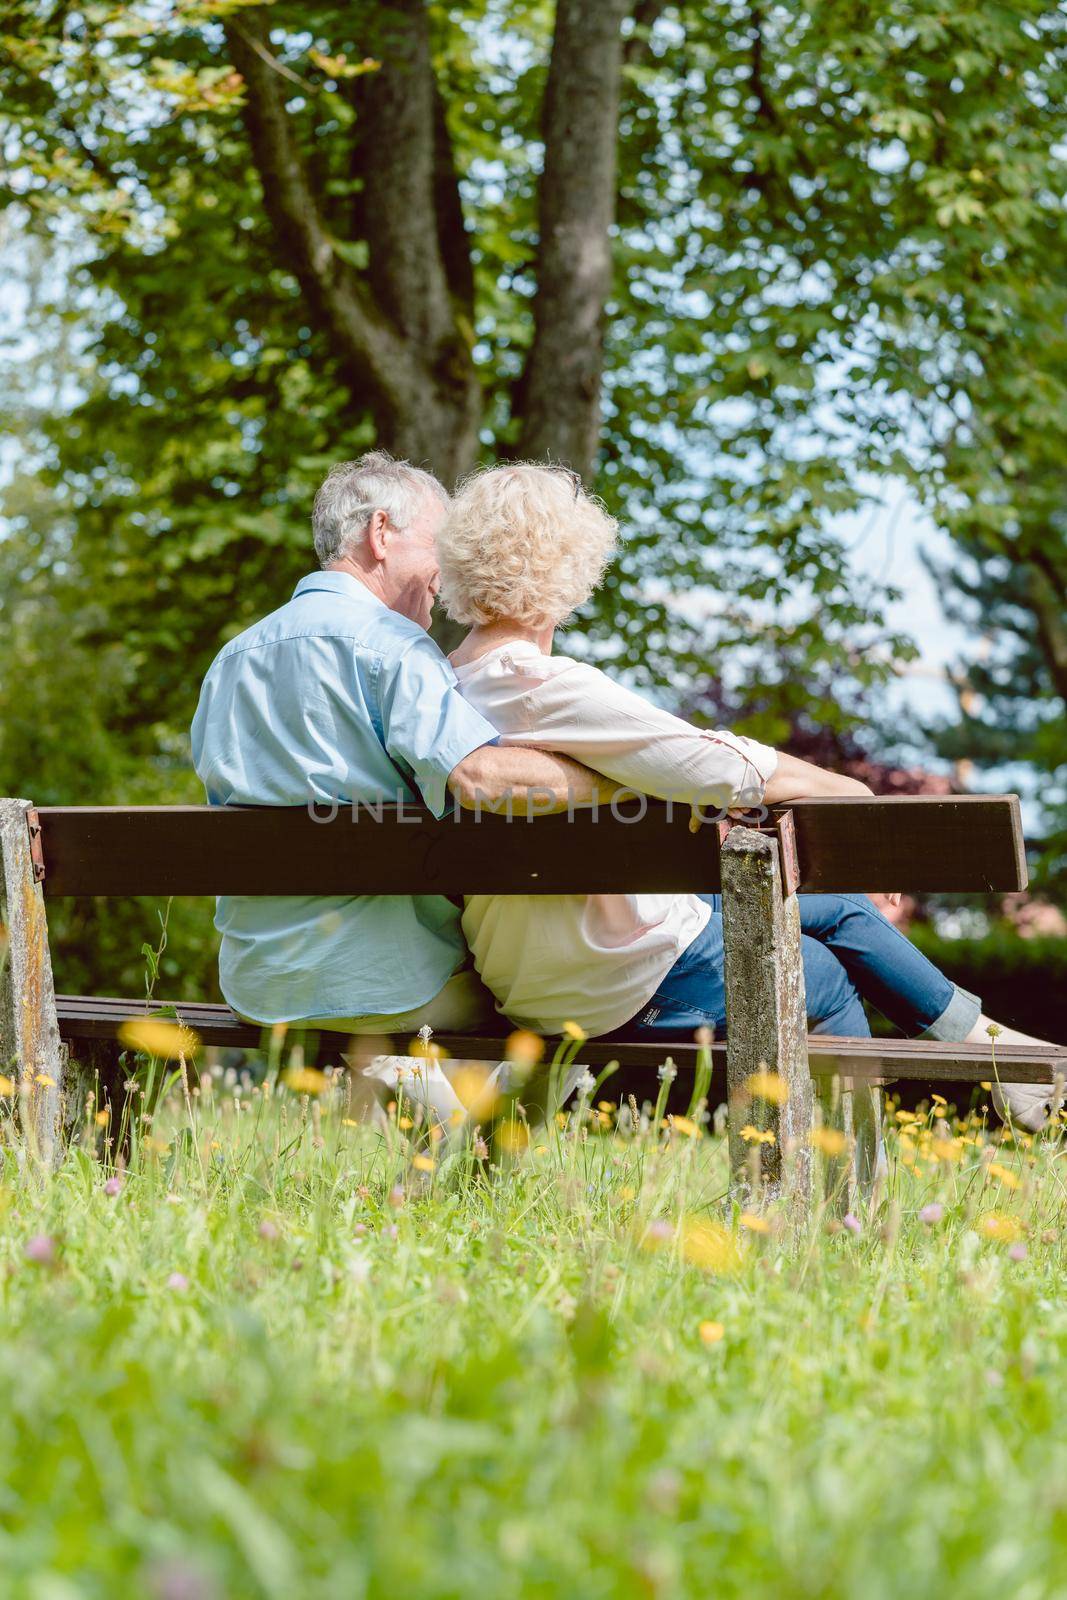 Rear view of a romantic elderly couple enjoying nature while sitting together on a bench in a tranquil day of summer in the park